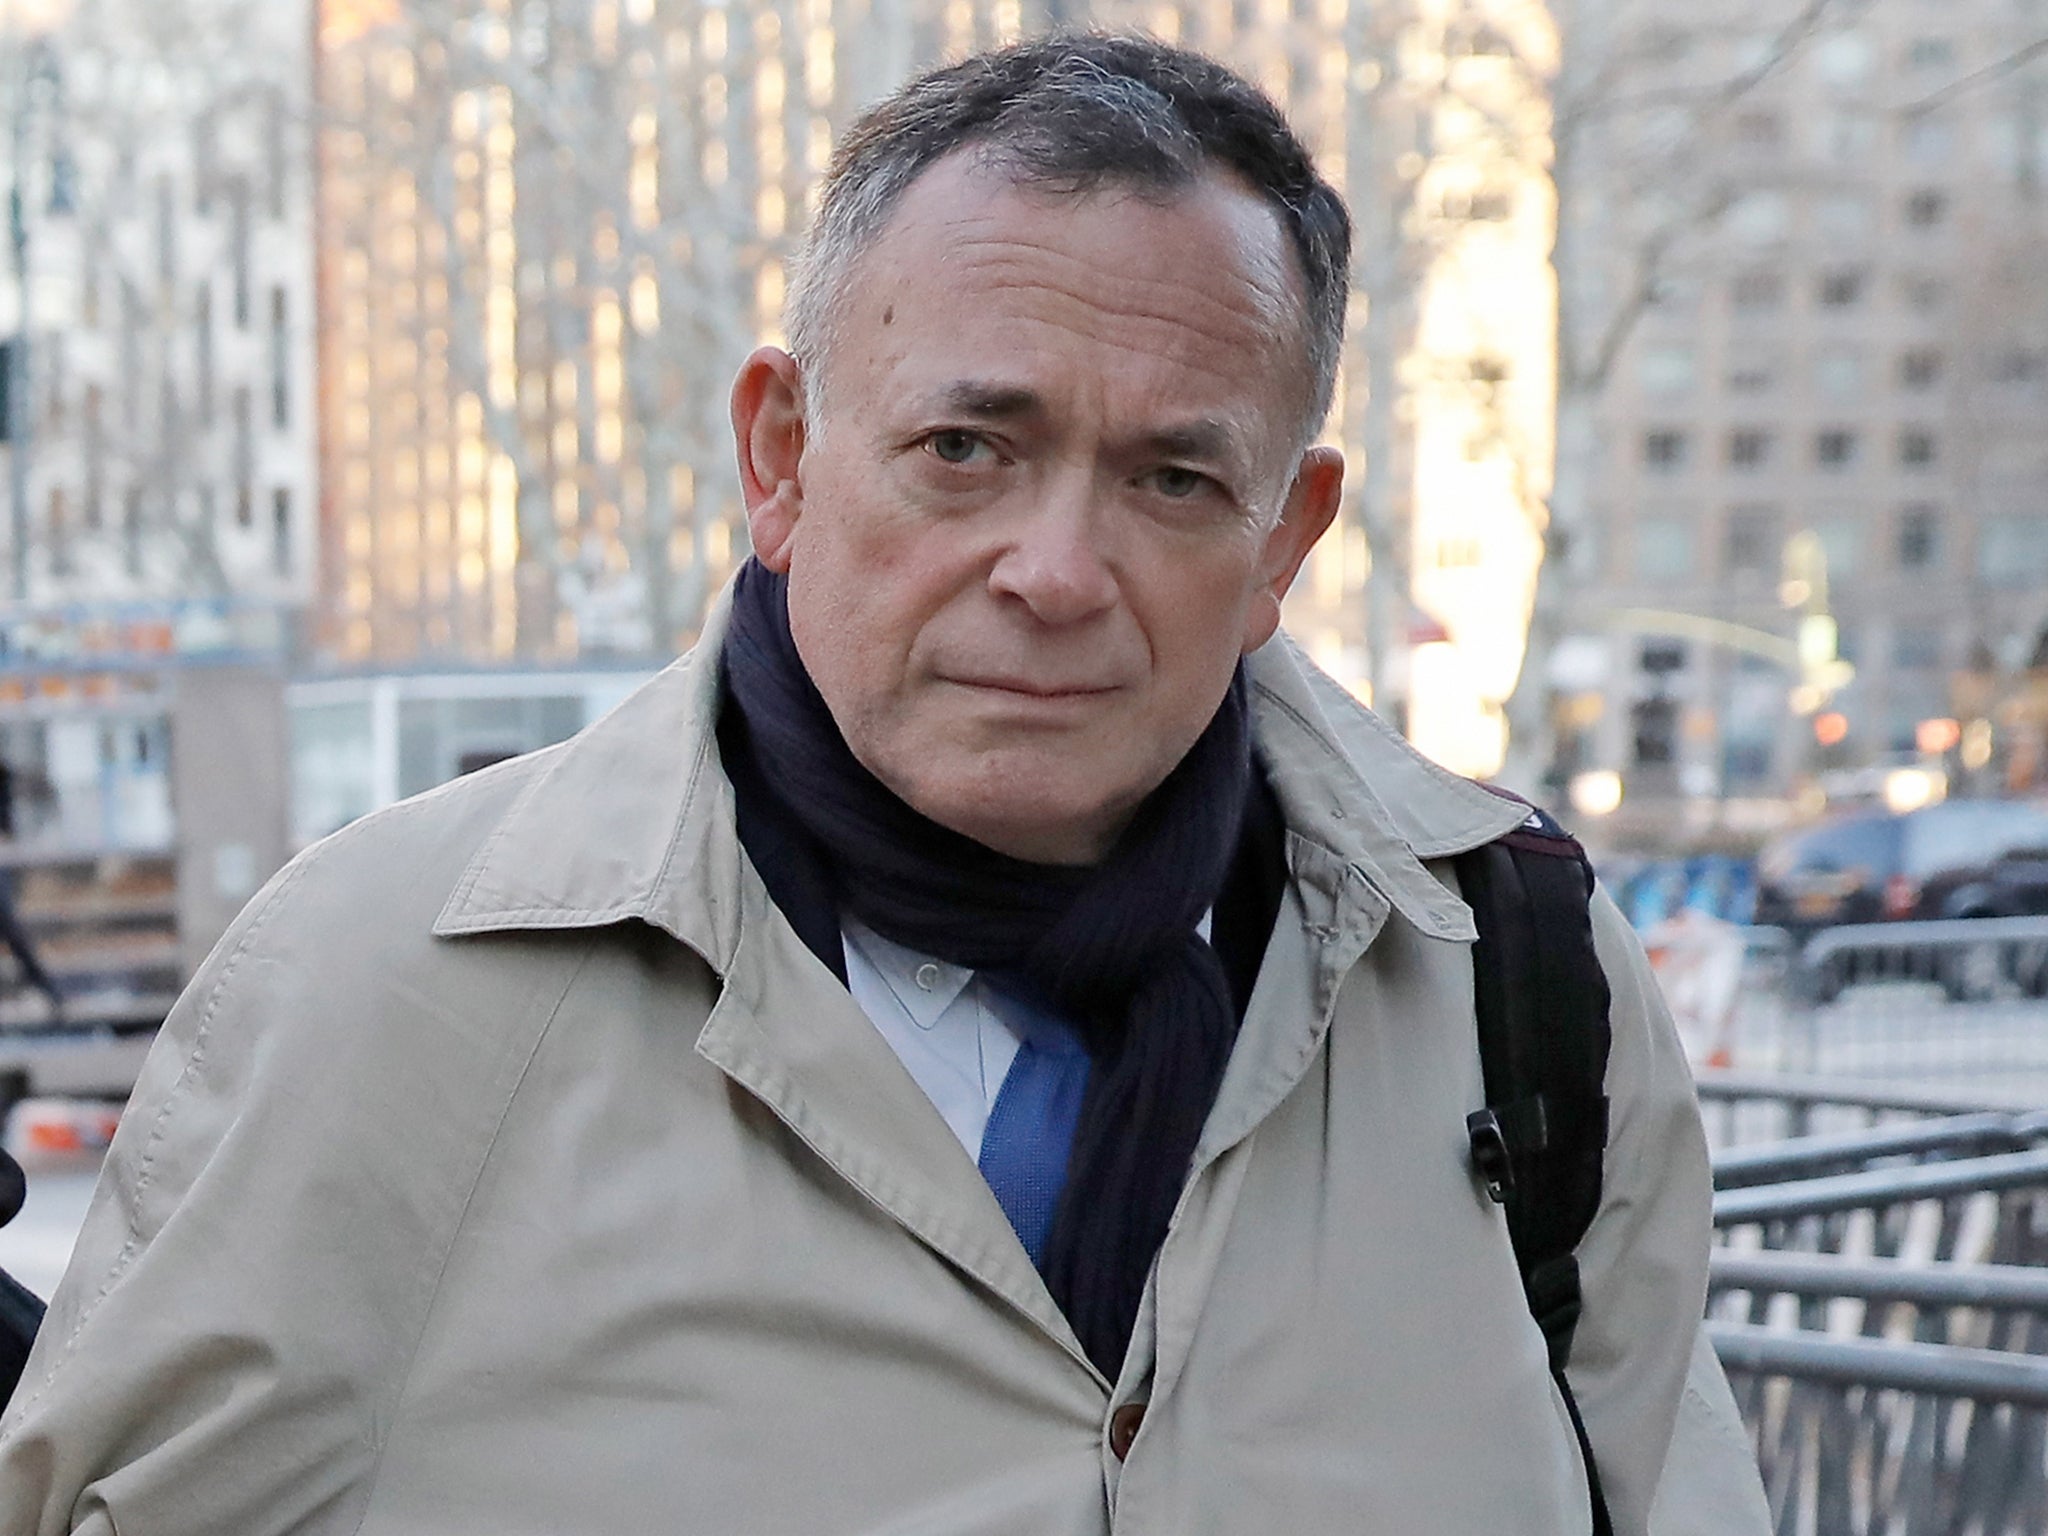 Ian Maxwell attending his sister Ghislaine’s sex-trafficking trial in New York